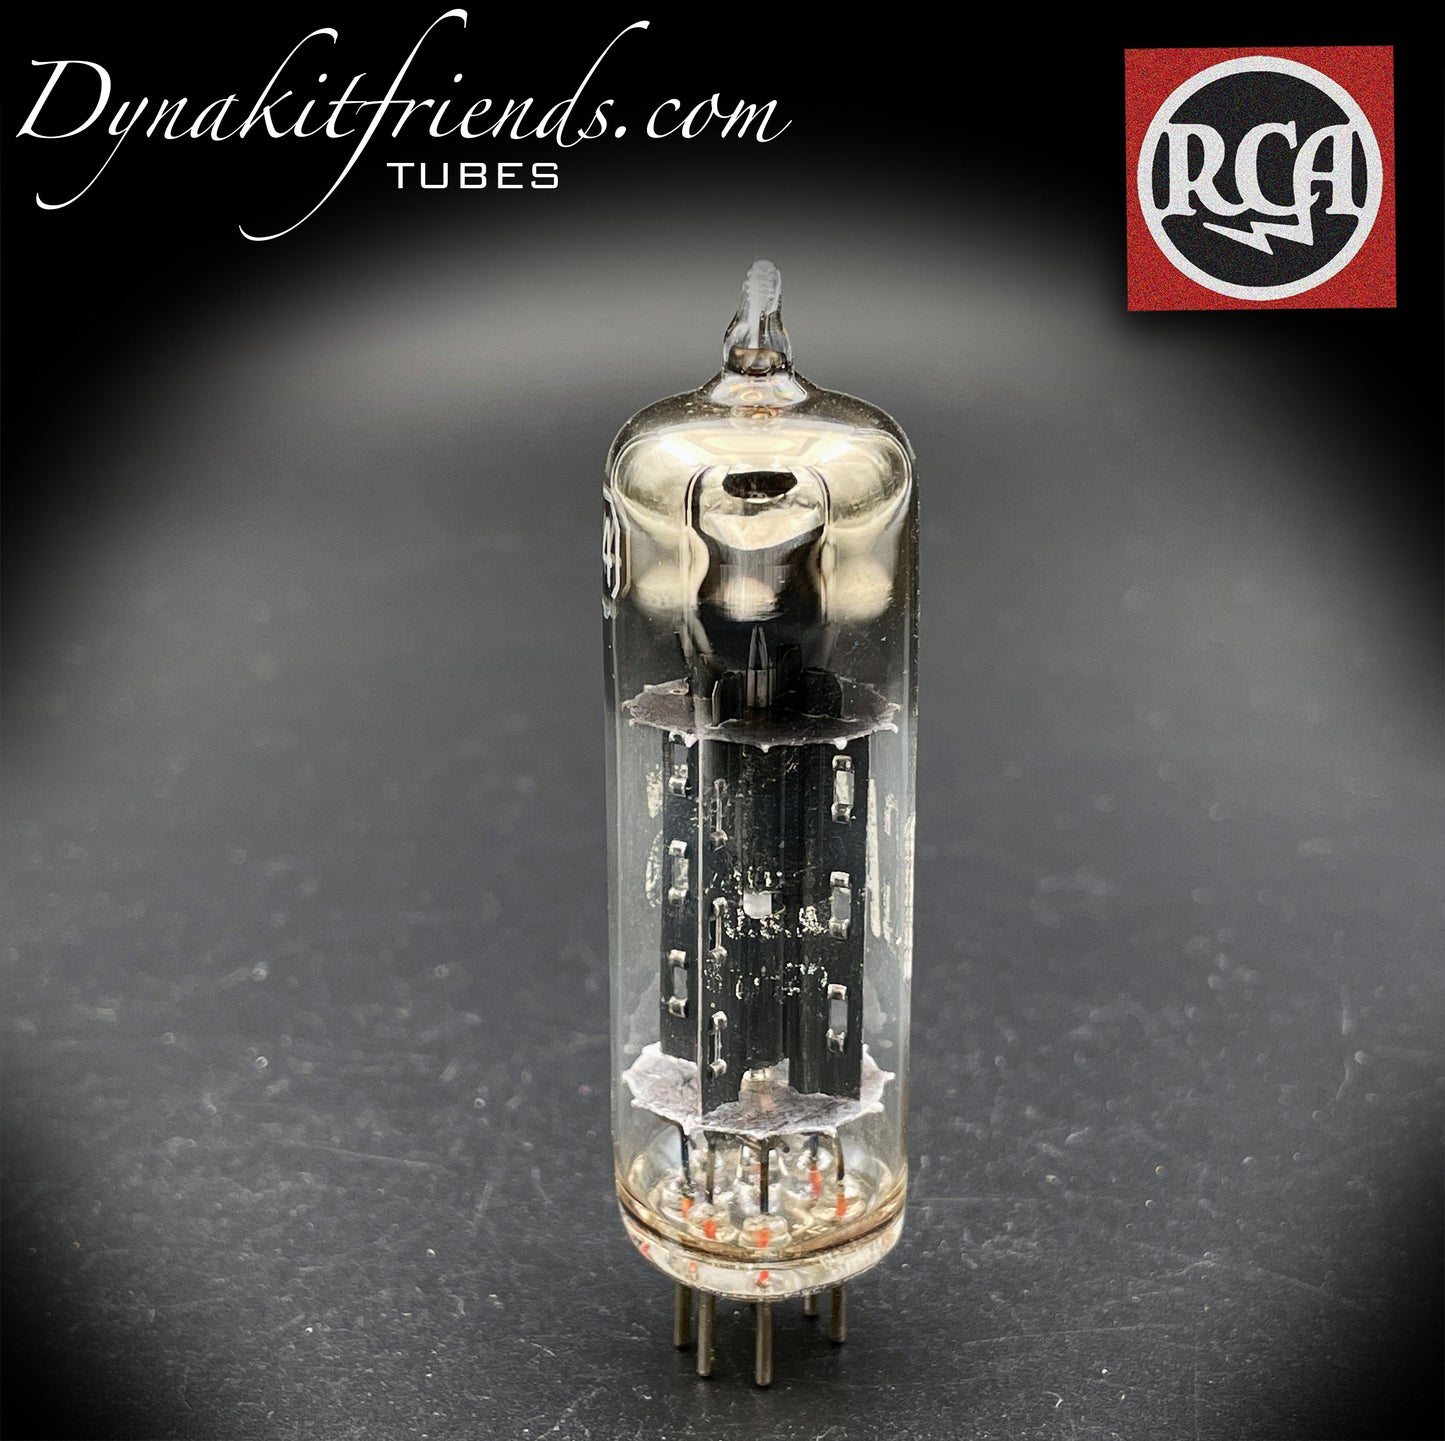 6X4 ( EZ90 ) RCA RECTIFIER MADE 1950s with DIMPLE-D SQUARE-GETTER for AUDIO NOTE